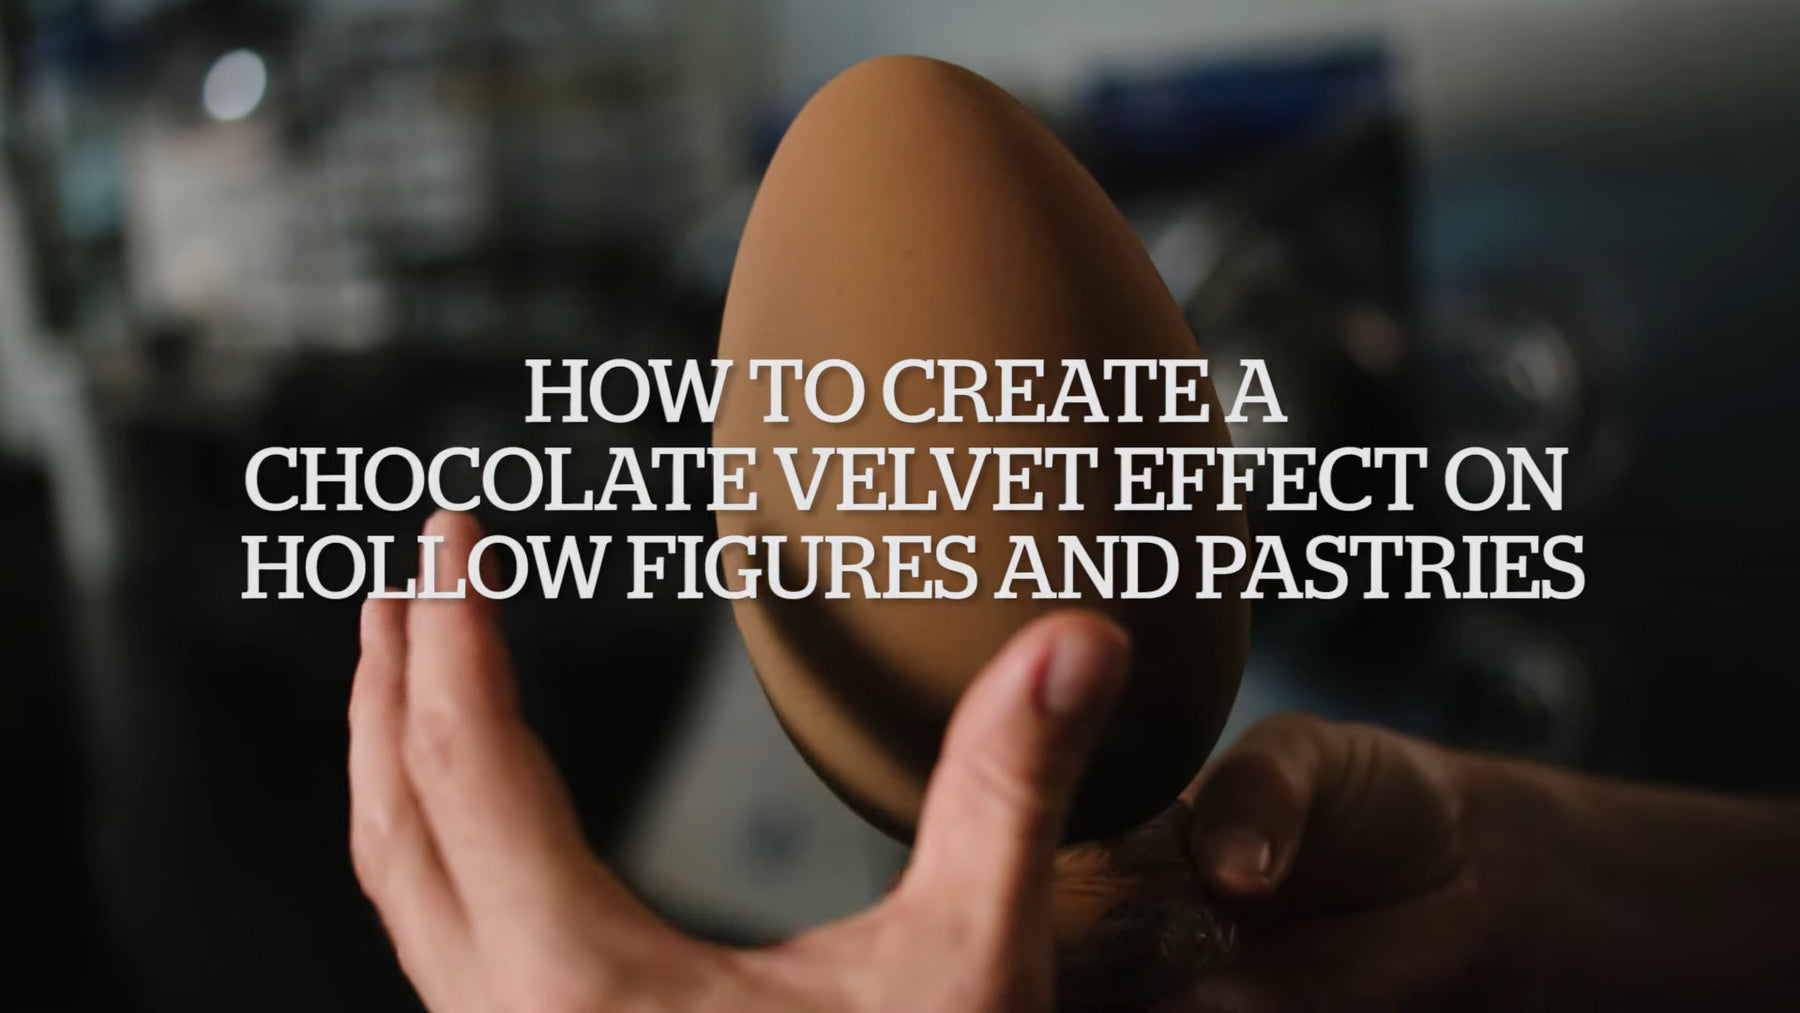 Spraying Chocolate Moulds - How to create Chocolate Velvet